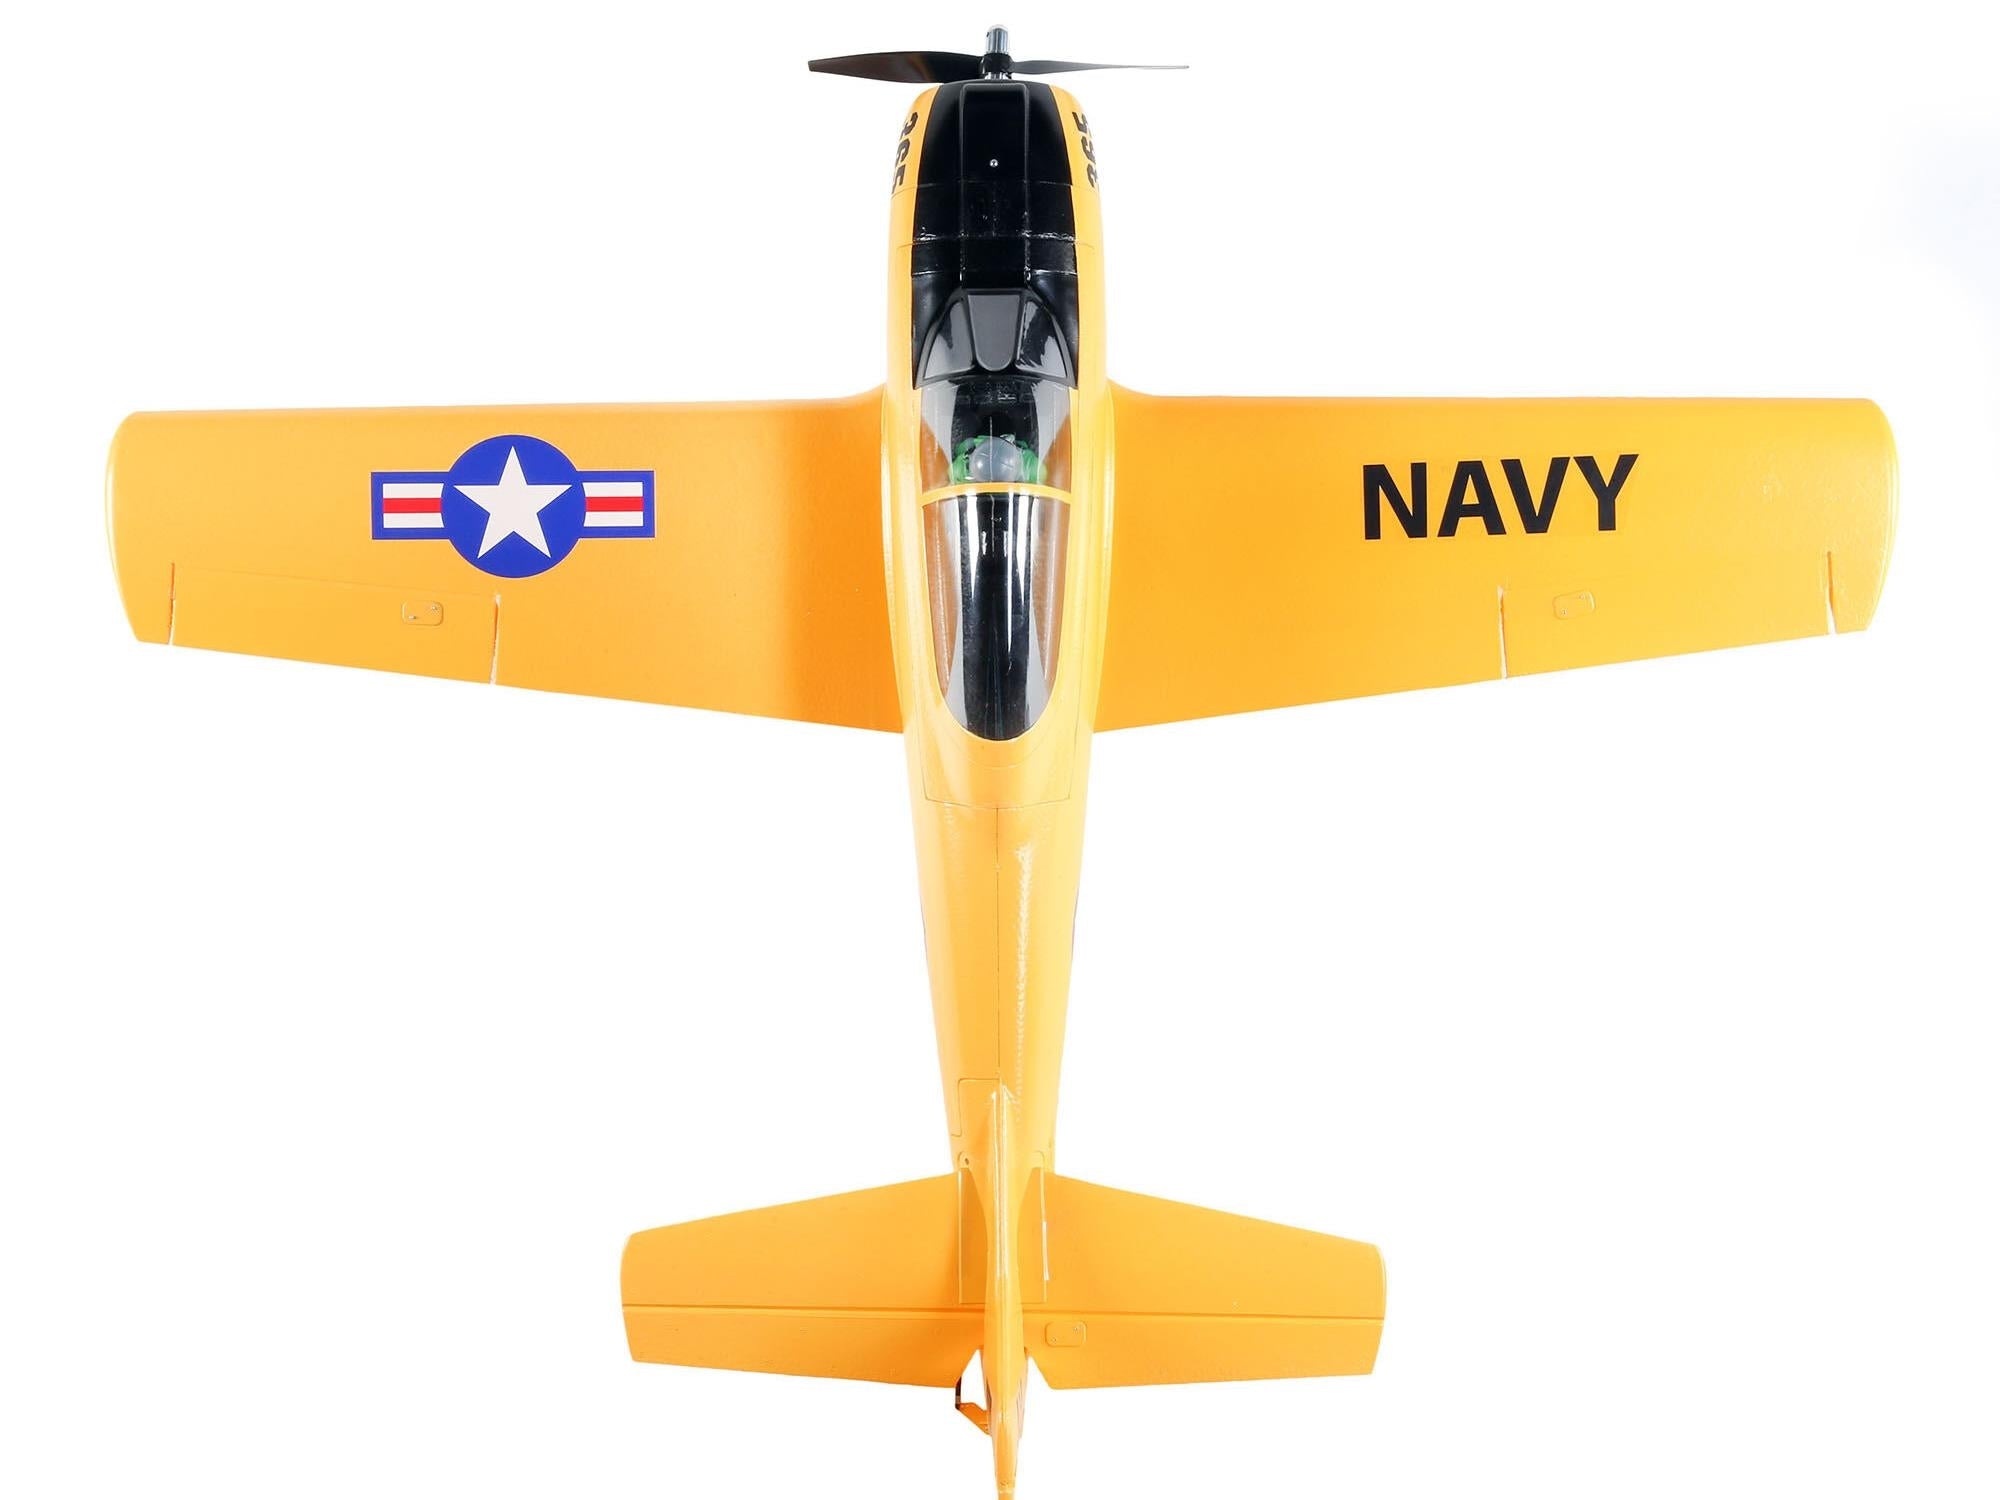 E-Flite T-28 Trojan 1.1m BNF Basic with AS3X and SAFE Select EFL08250